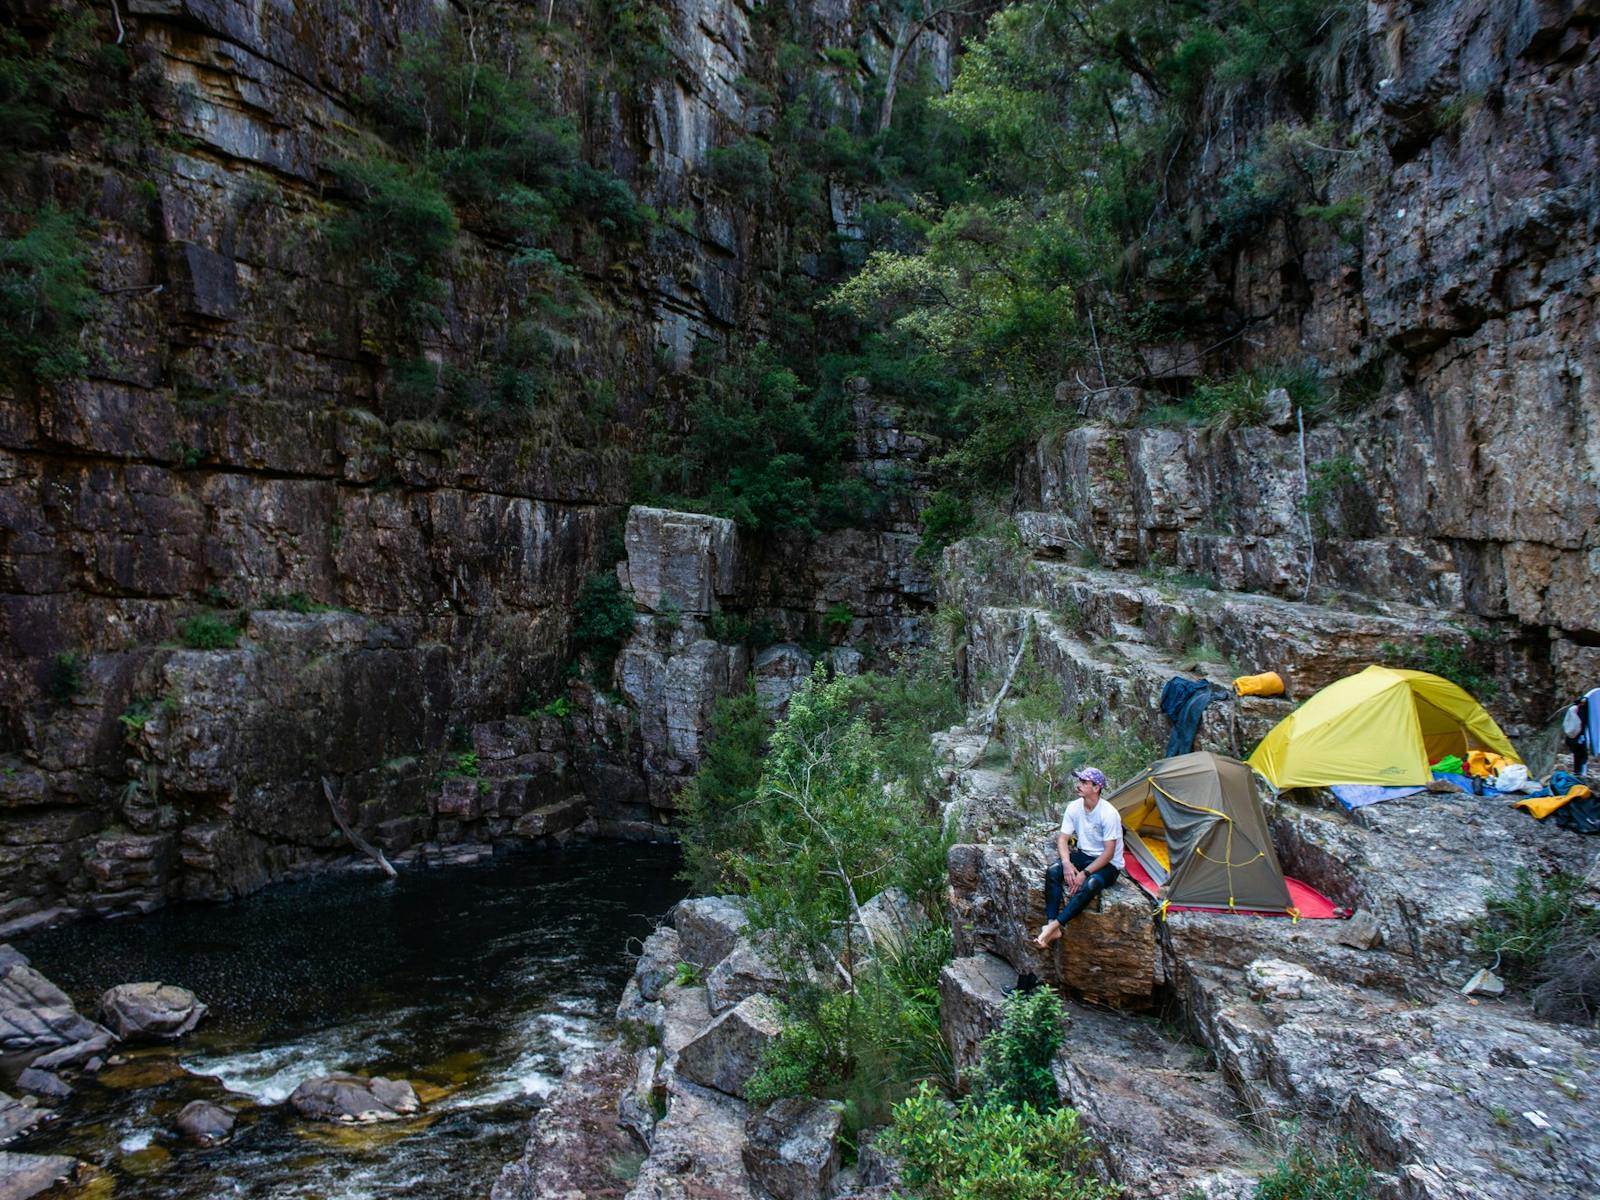 A tent set up in a stunning gorge campsite on a packrafting trip